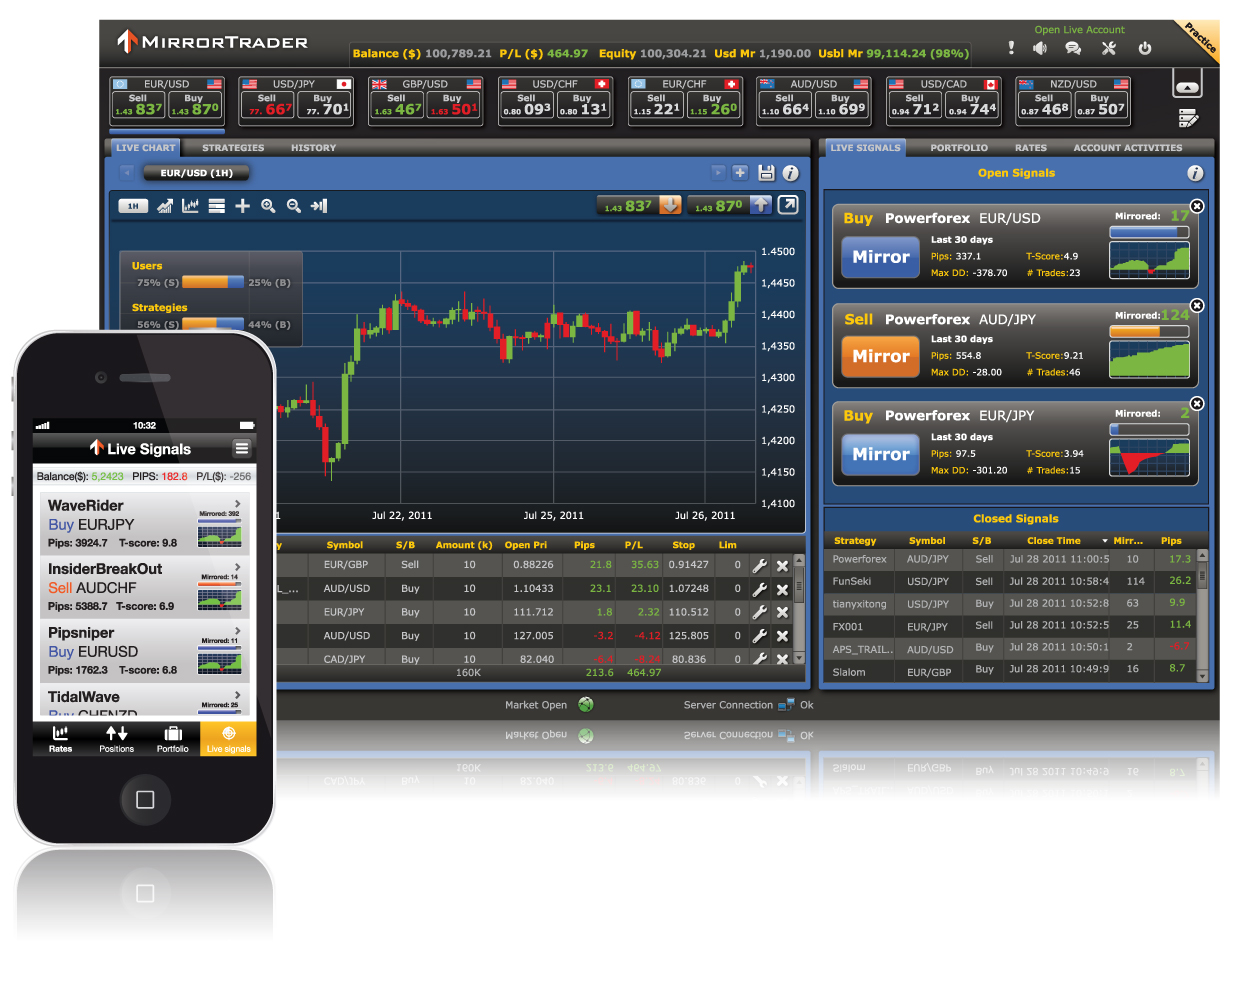 Tradency to Launch Mirror Trader Mobile Application With ...